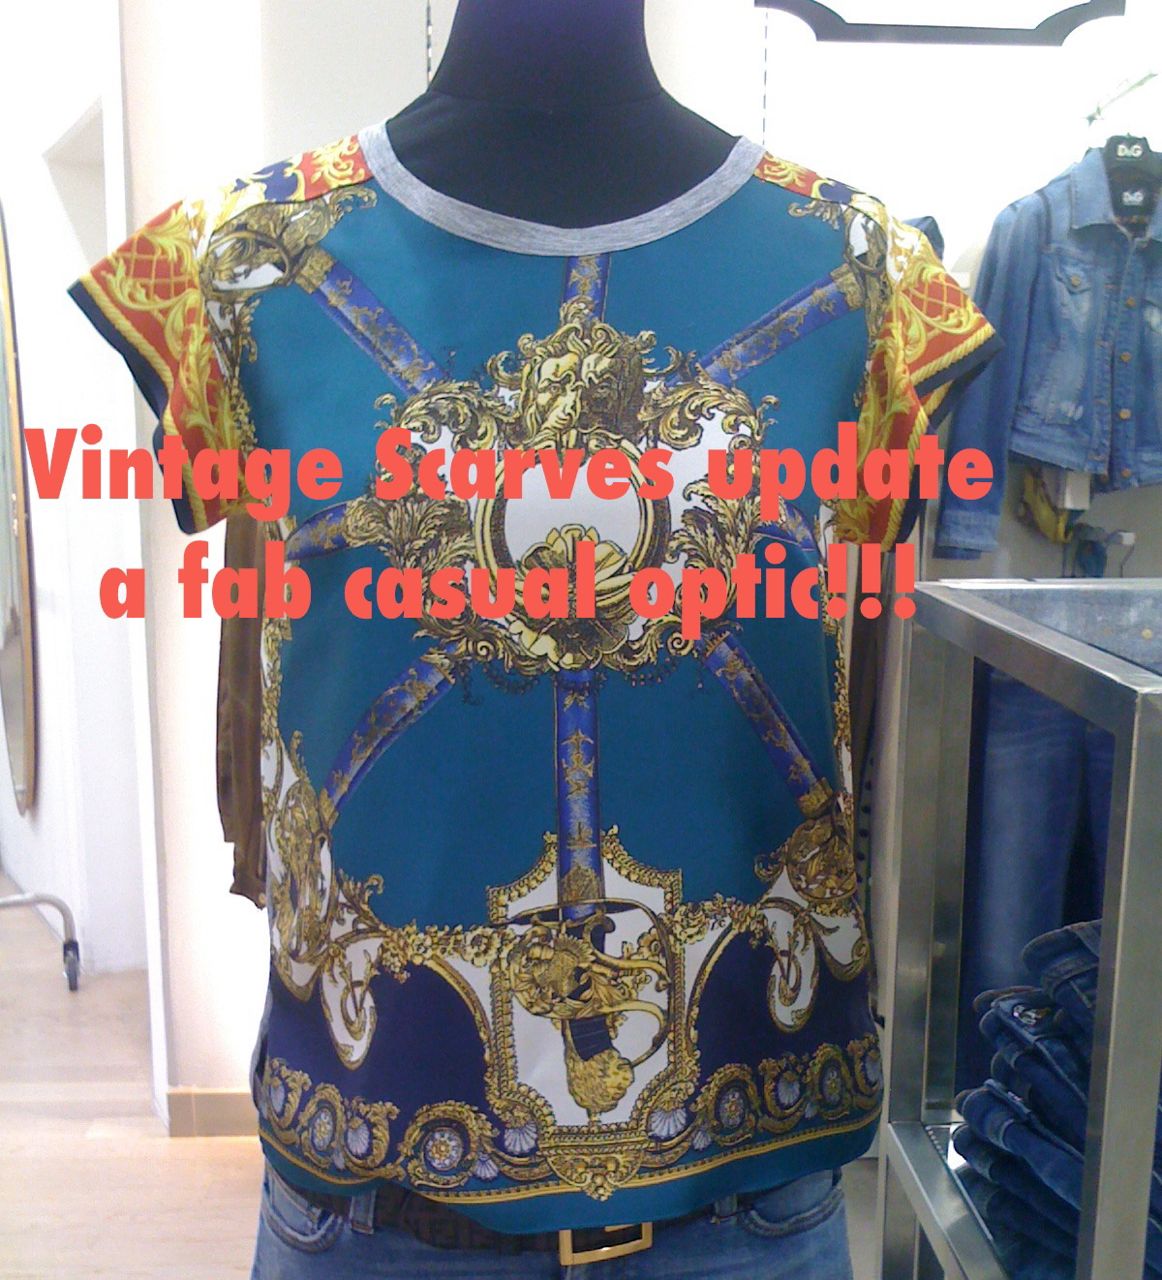 You are currently viewing <!--:en-->Vintage Scarves can achieve this  Exotic and Boheme Designer look!!!!!<!--:-->